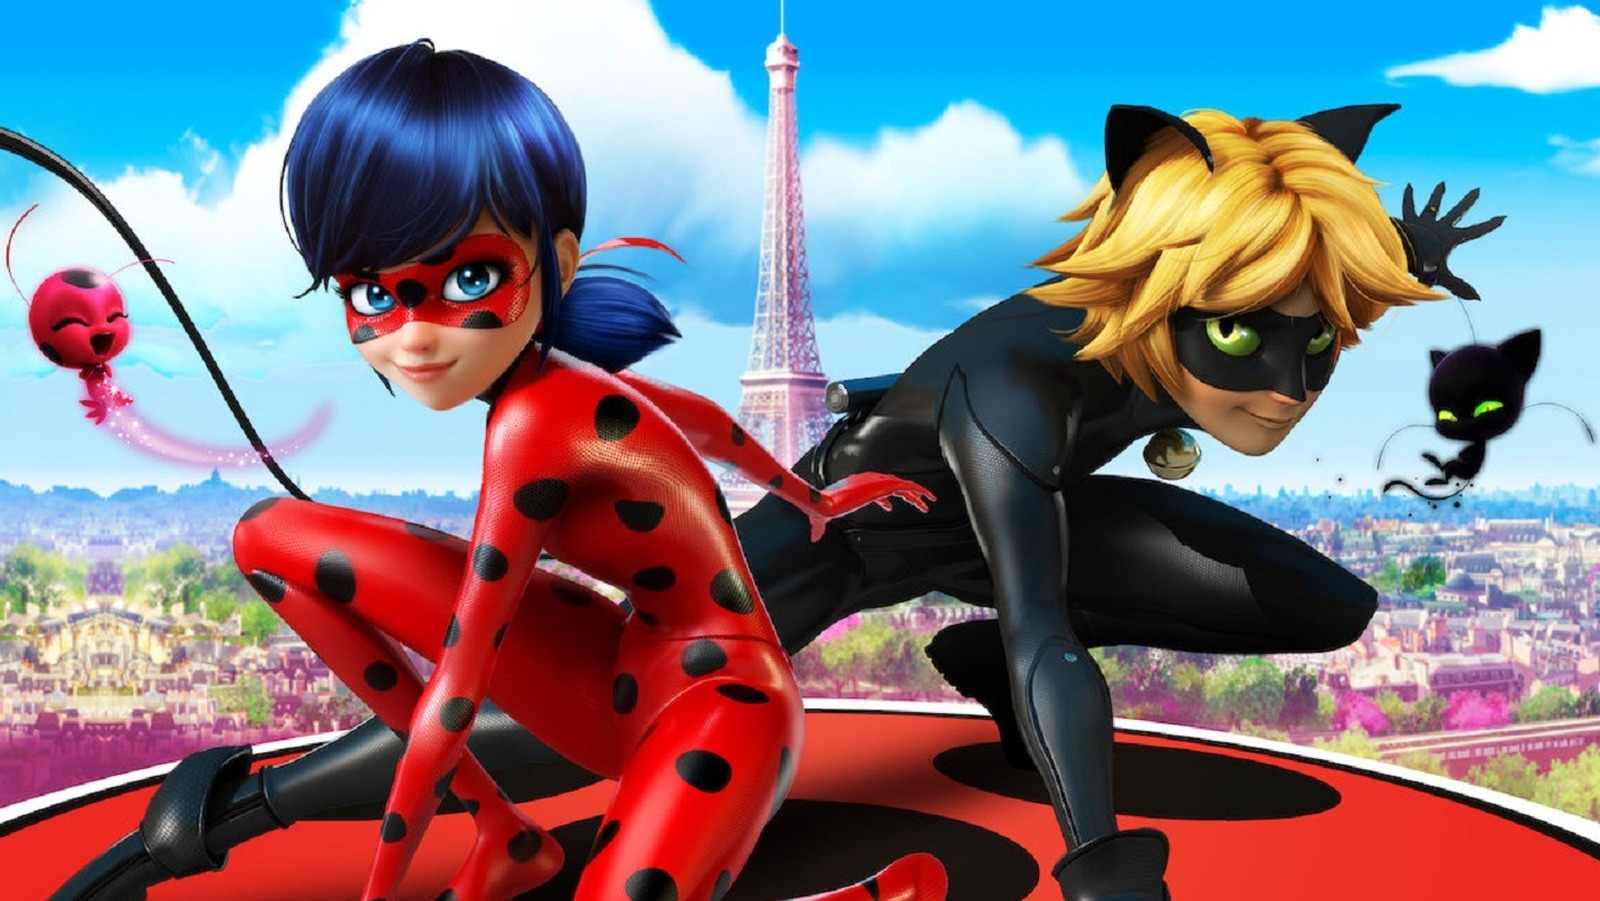 Miraculous: Tales of Ladybug & Cat Noir”: The French cartoon's rise to  global popularity